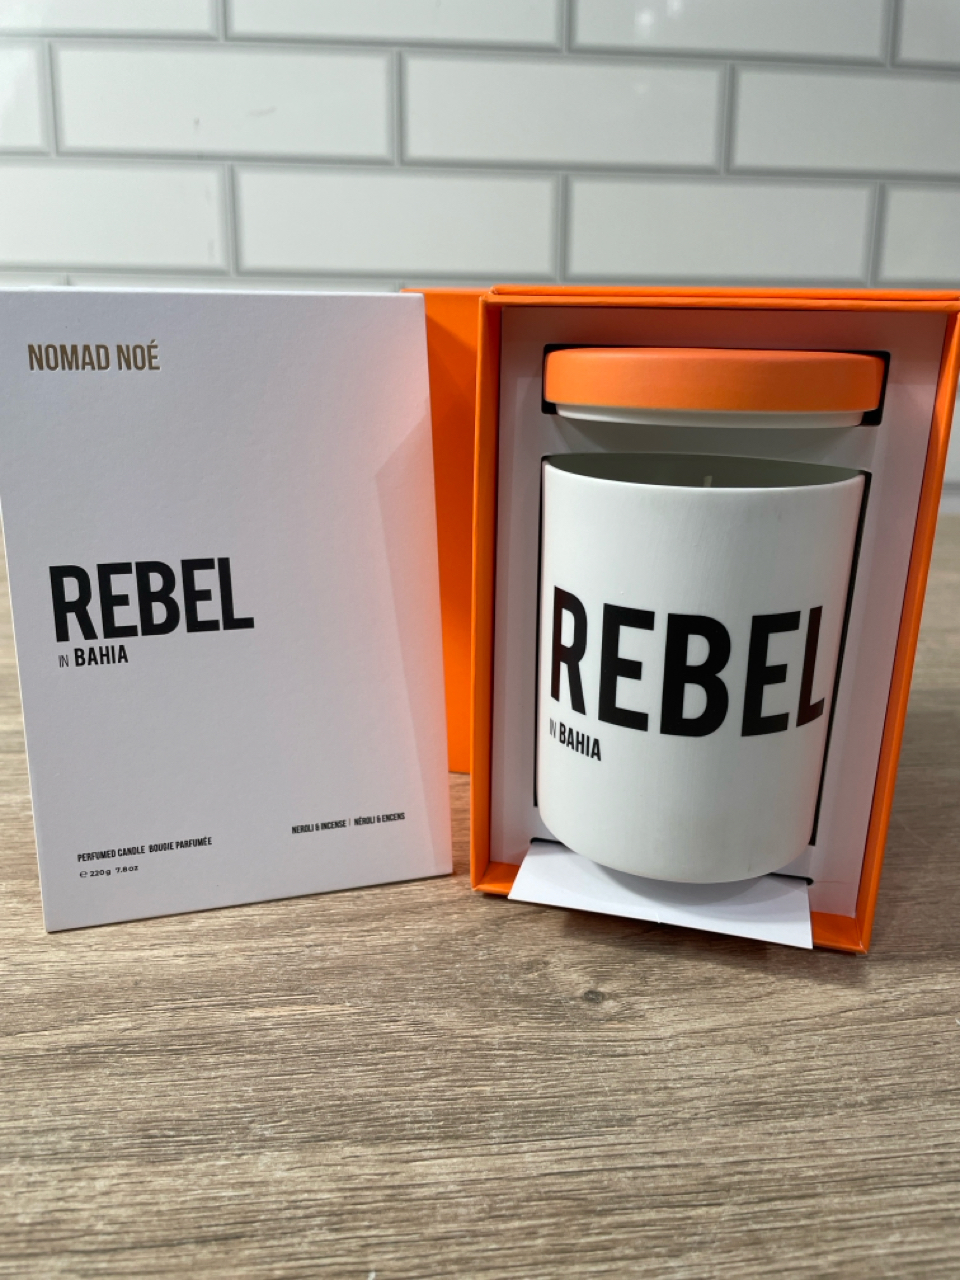 Rebel Scented Candle from Nomad Noe - Image 2 of 4